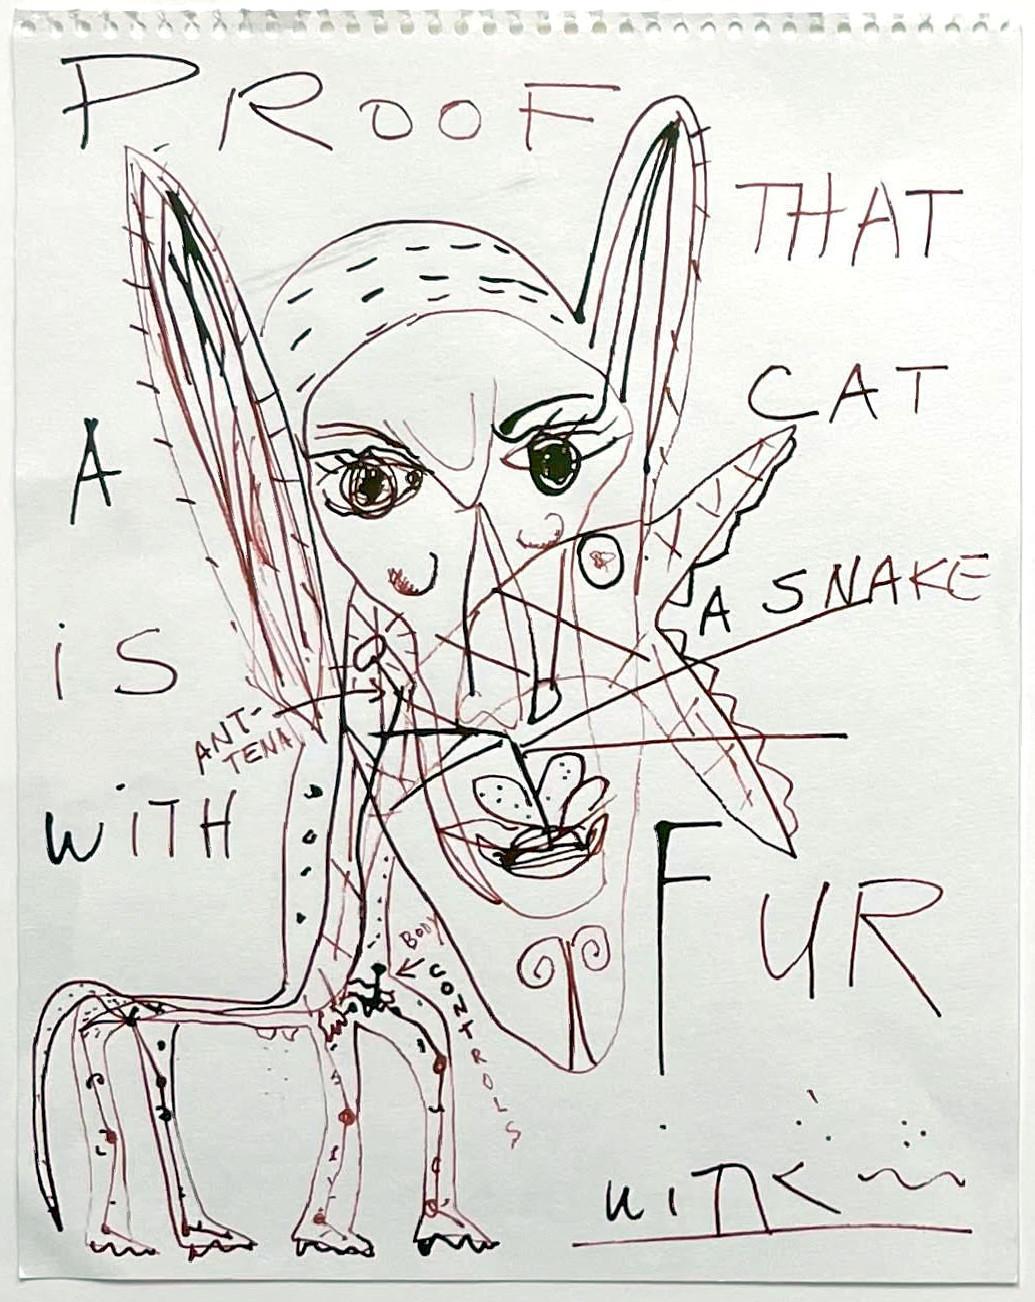 Proof that a Cat is a Snake with Fur, from the Patrick Eddington Cat Project - Art by Jerome Witkin